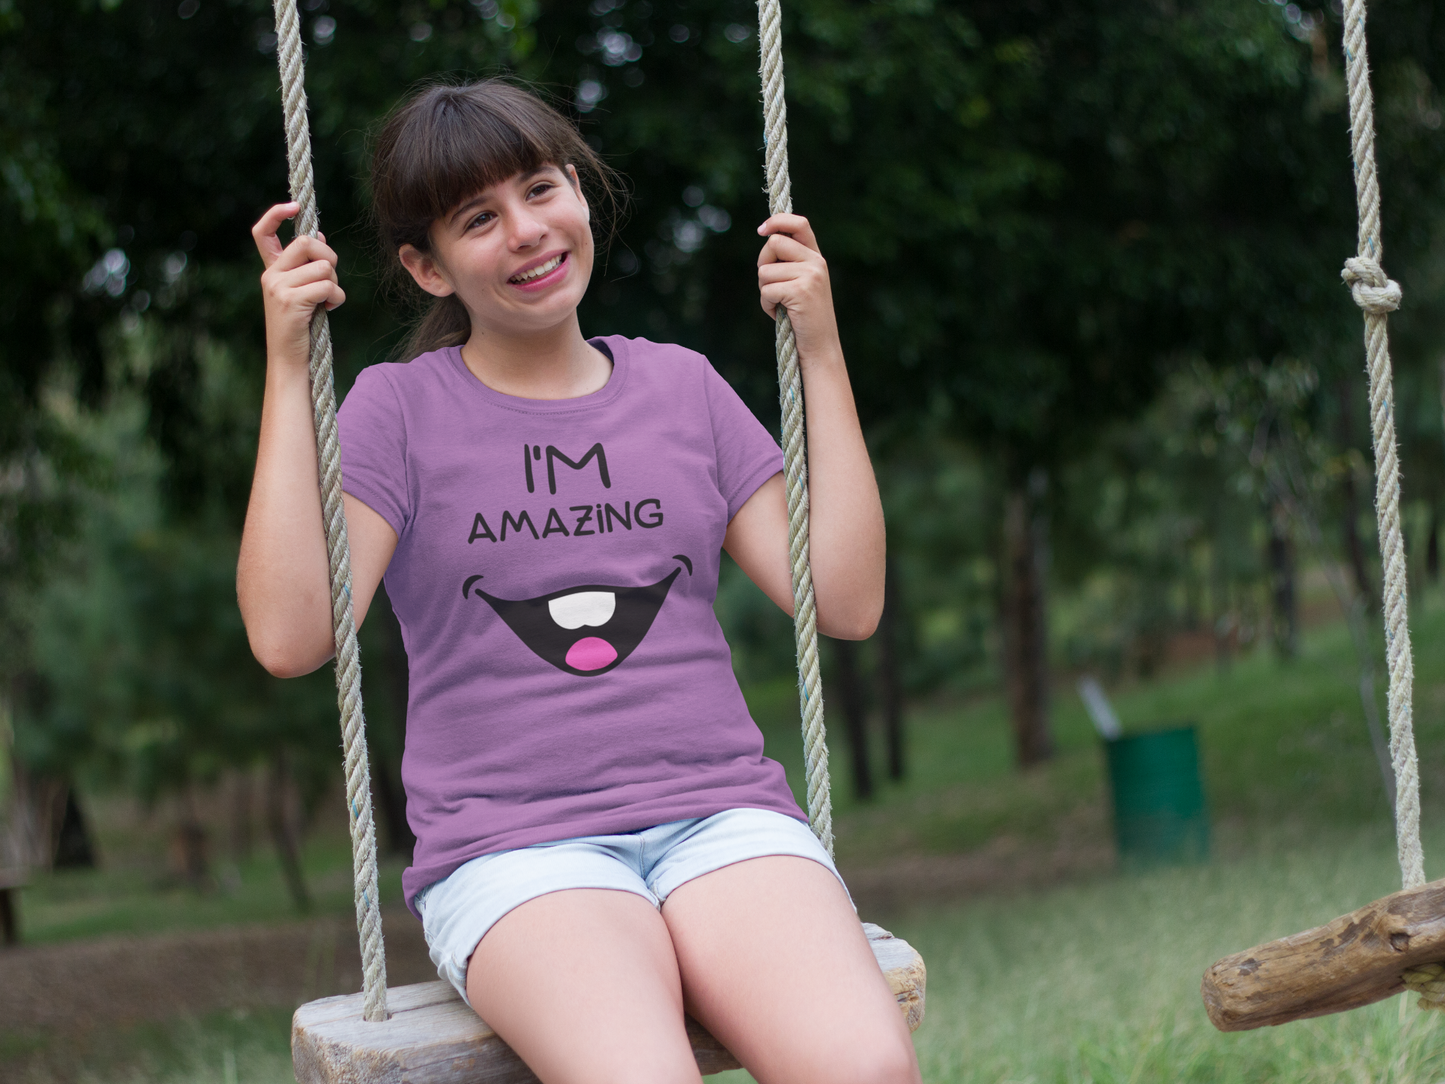 I'm Amazing With Toothy Smile Youth Short Sleeve Tee